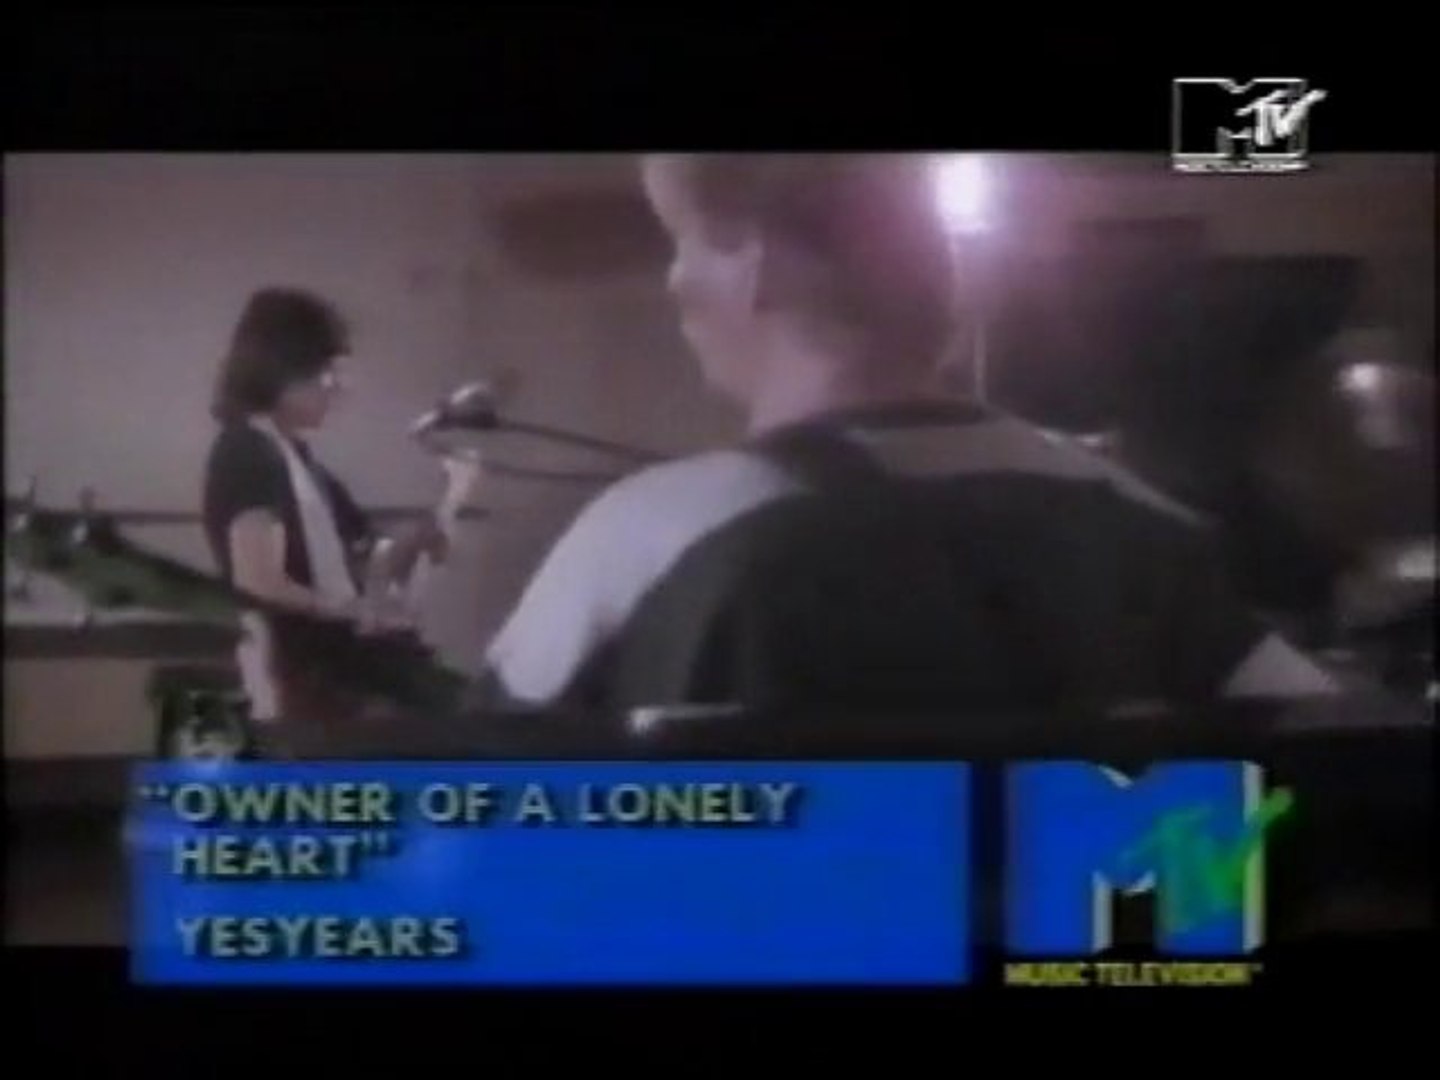 Owner Of A Lonely Heart Video